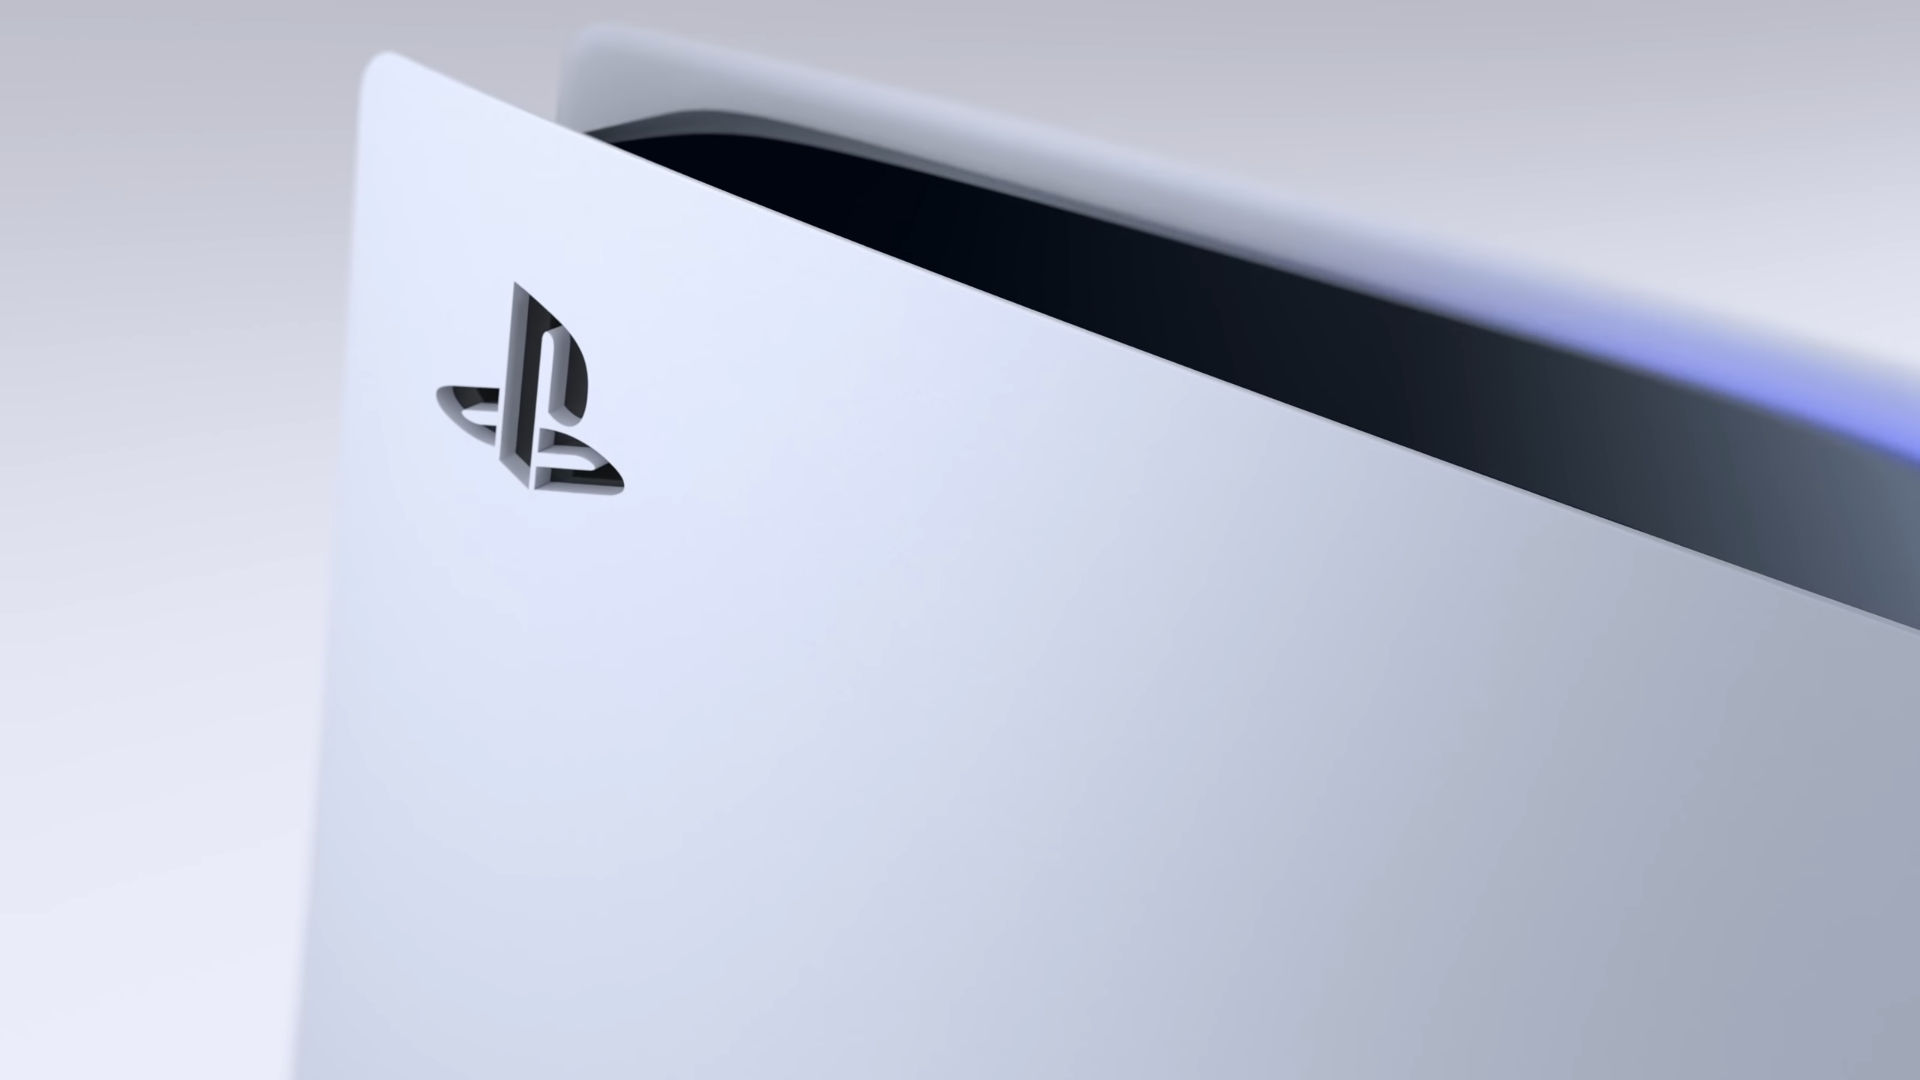 Rumor suggests both PlayStation 5 and PS5 Pro will launch